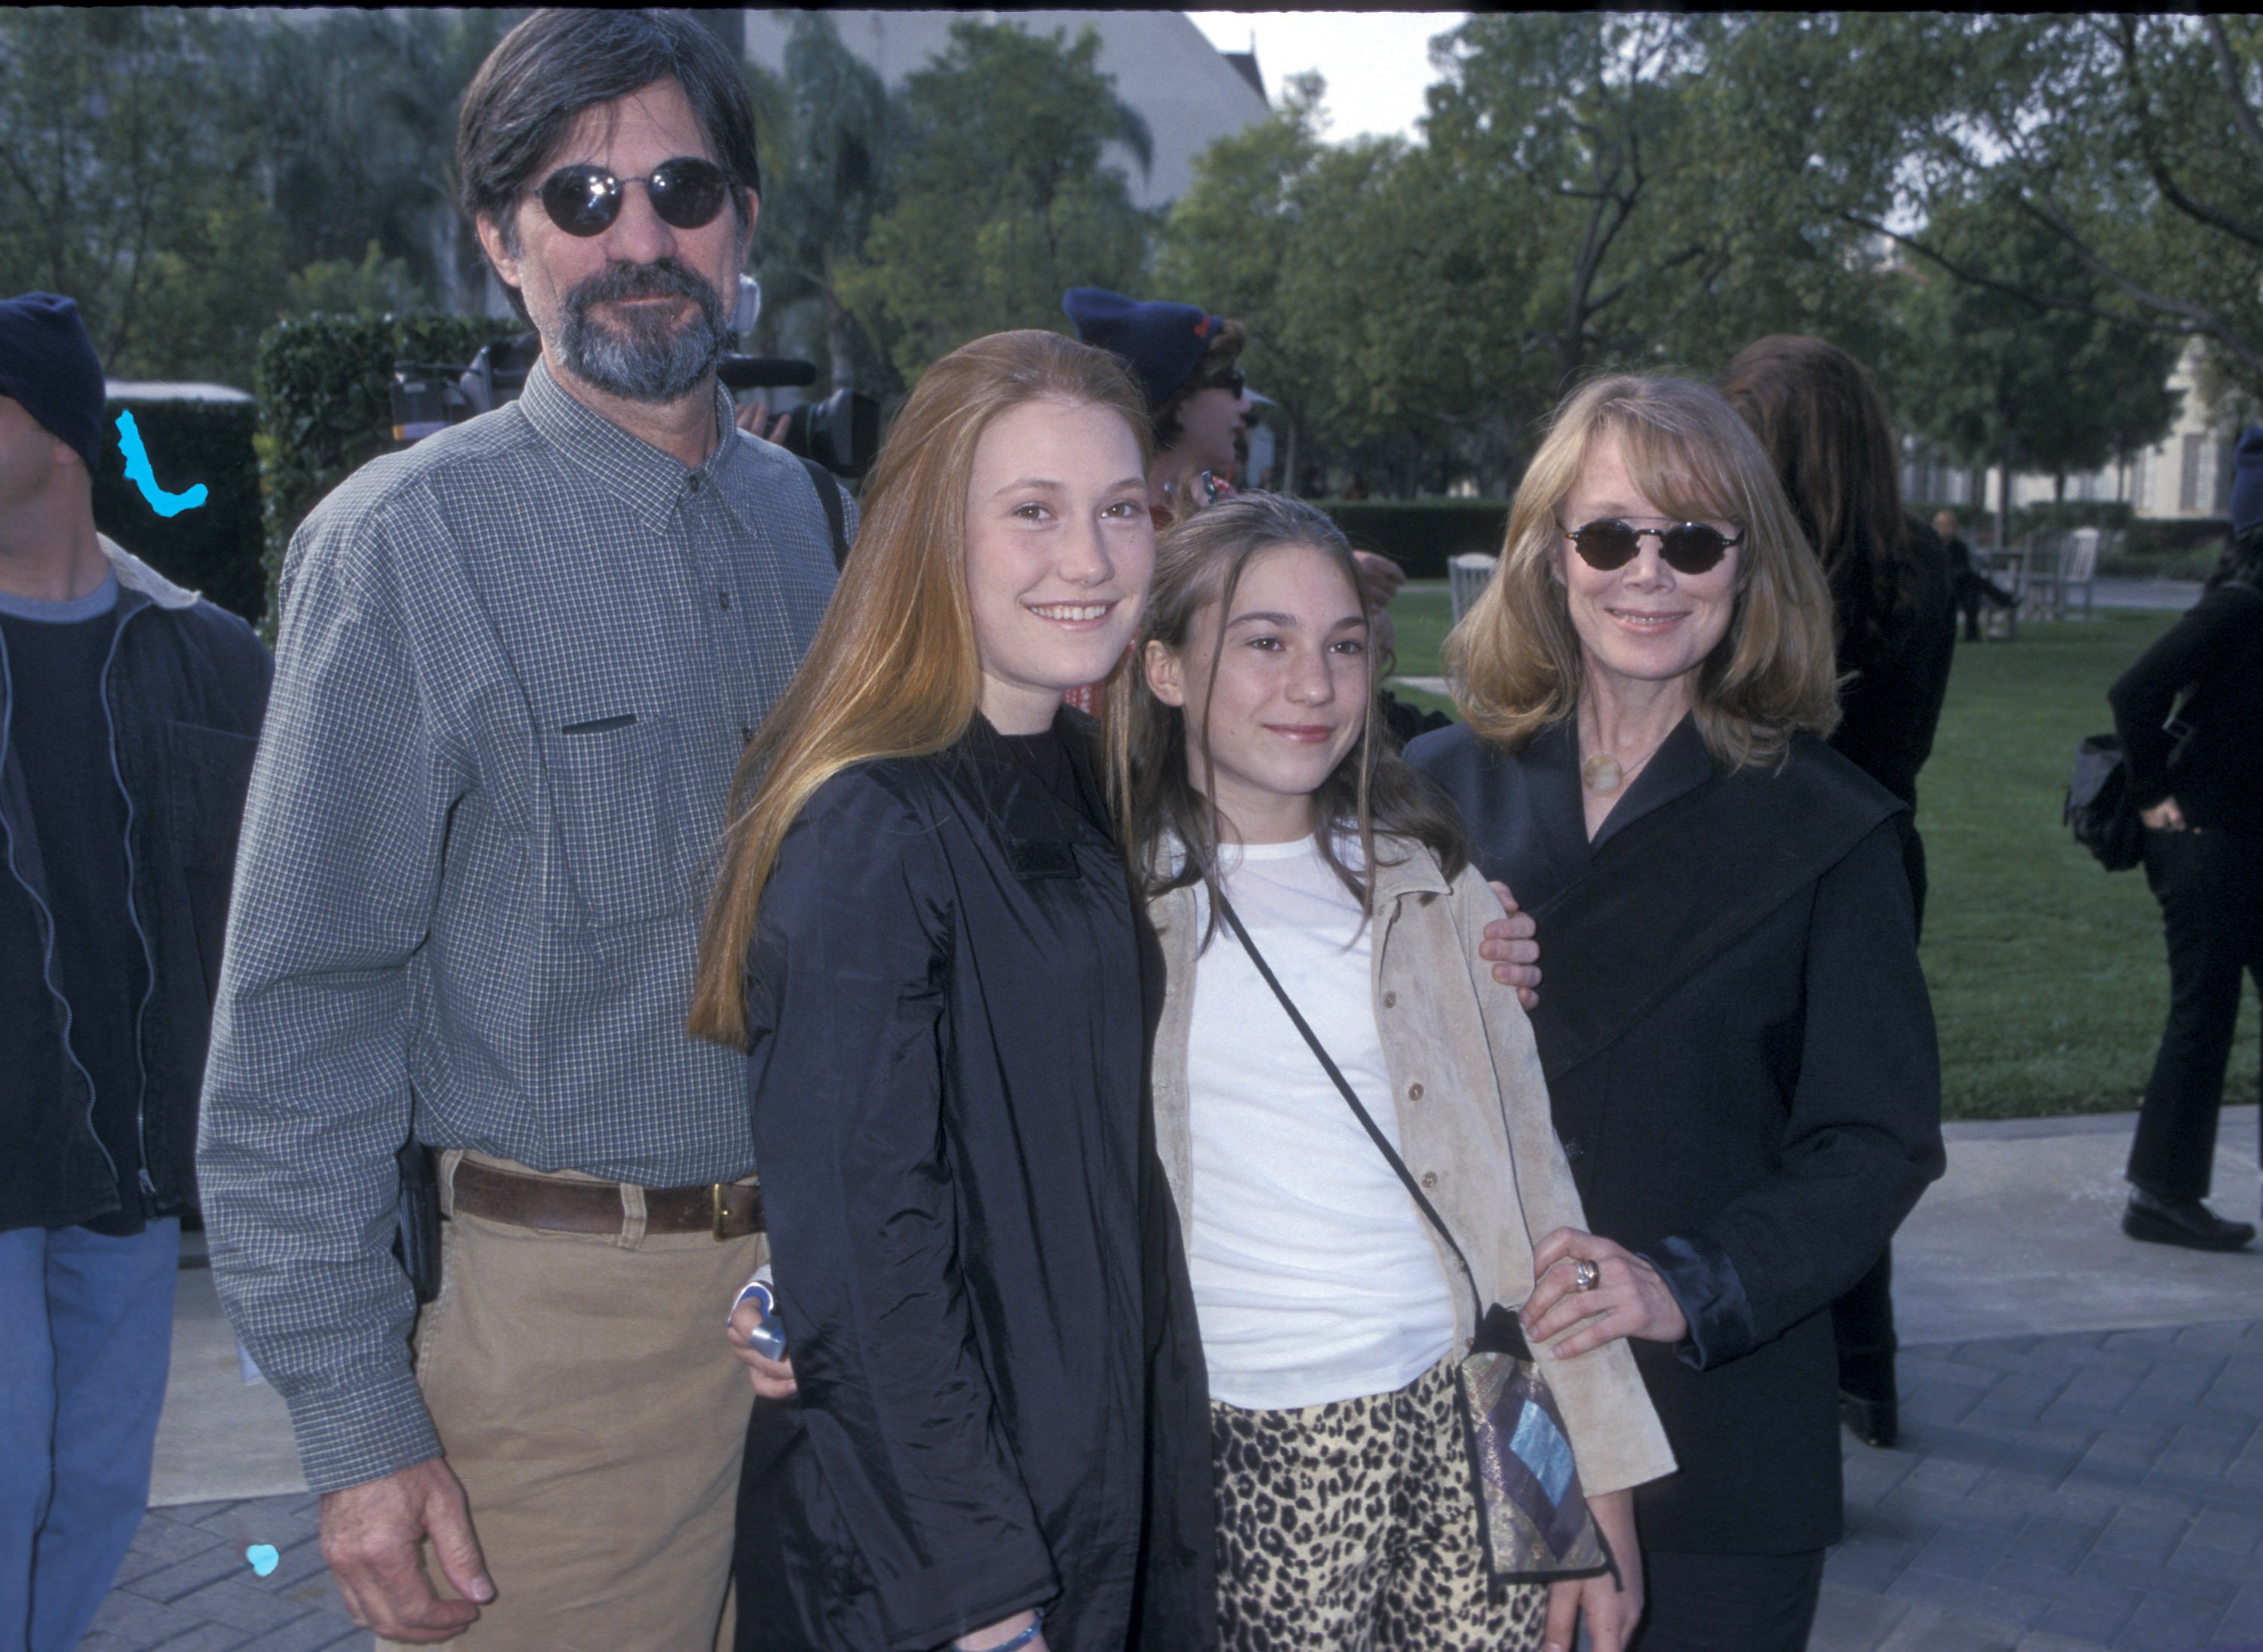 Jack Fisk pictured with his daughters Schuyler Fisk and Madison Fisk and his wife Sissy Spacek at the "Snow Day" premiere | Source: Getty Images